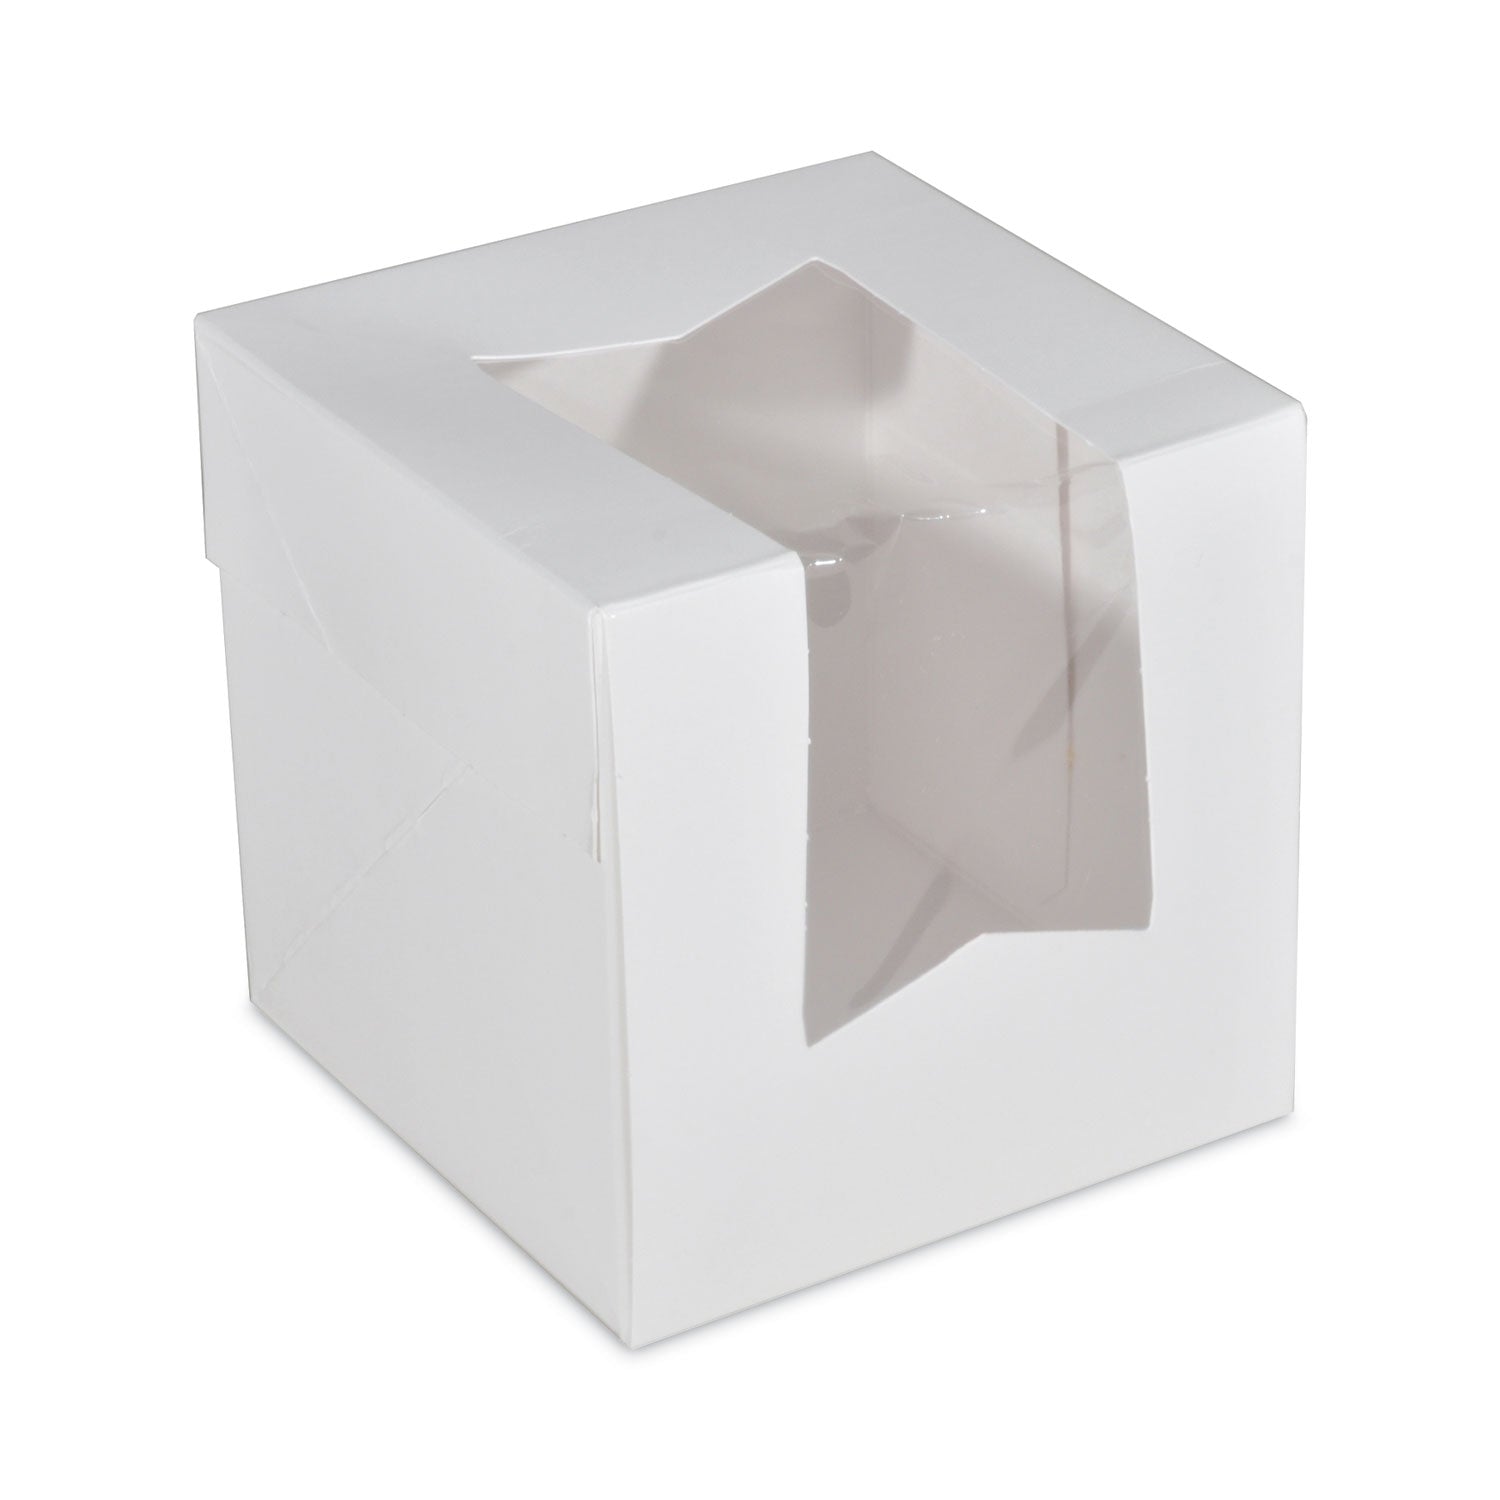 white-window-bakery-boxes-with-attached-flip-top-4-corner-beers-design-45-x-45-x-45-white-paper-200-carton_sch24033 - 1